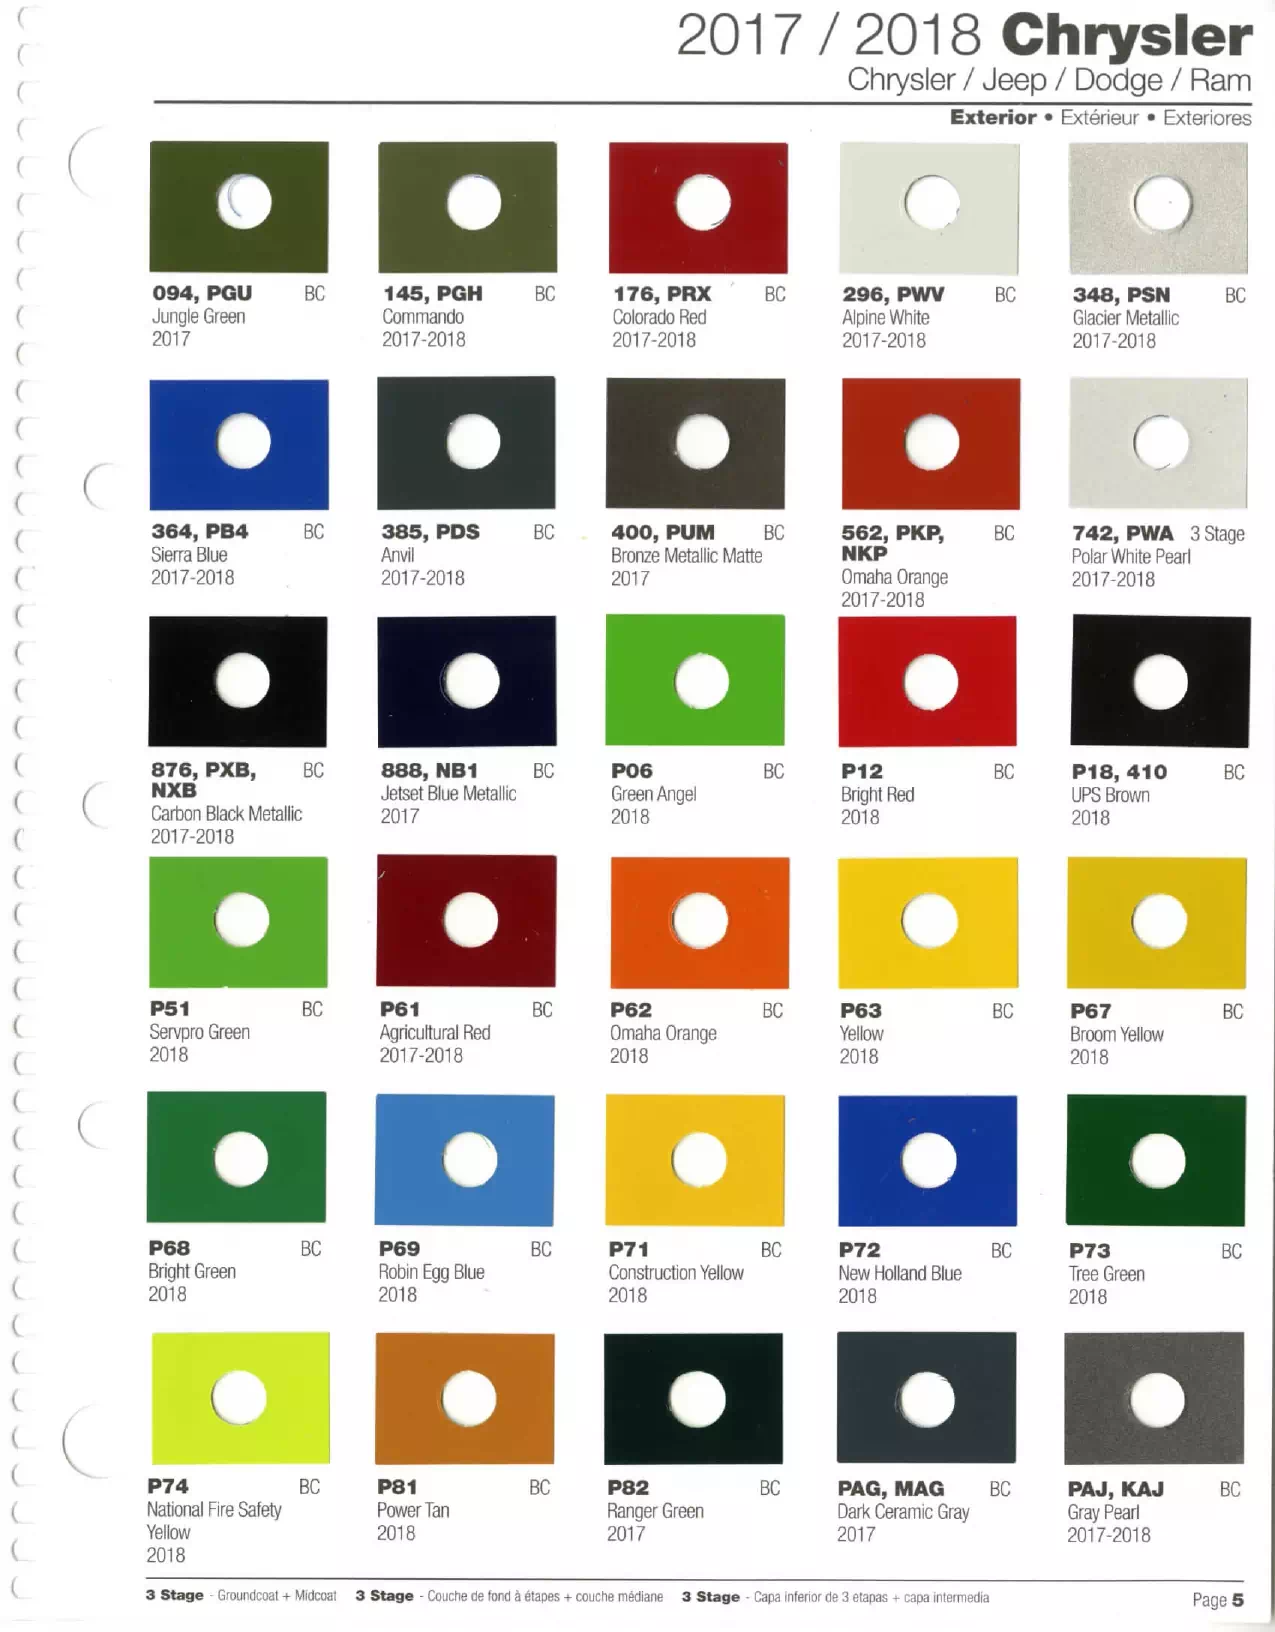 color codes, shades and color names